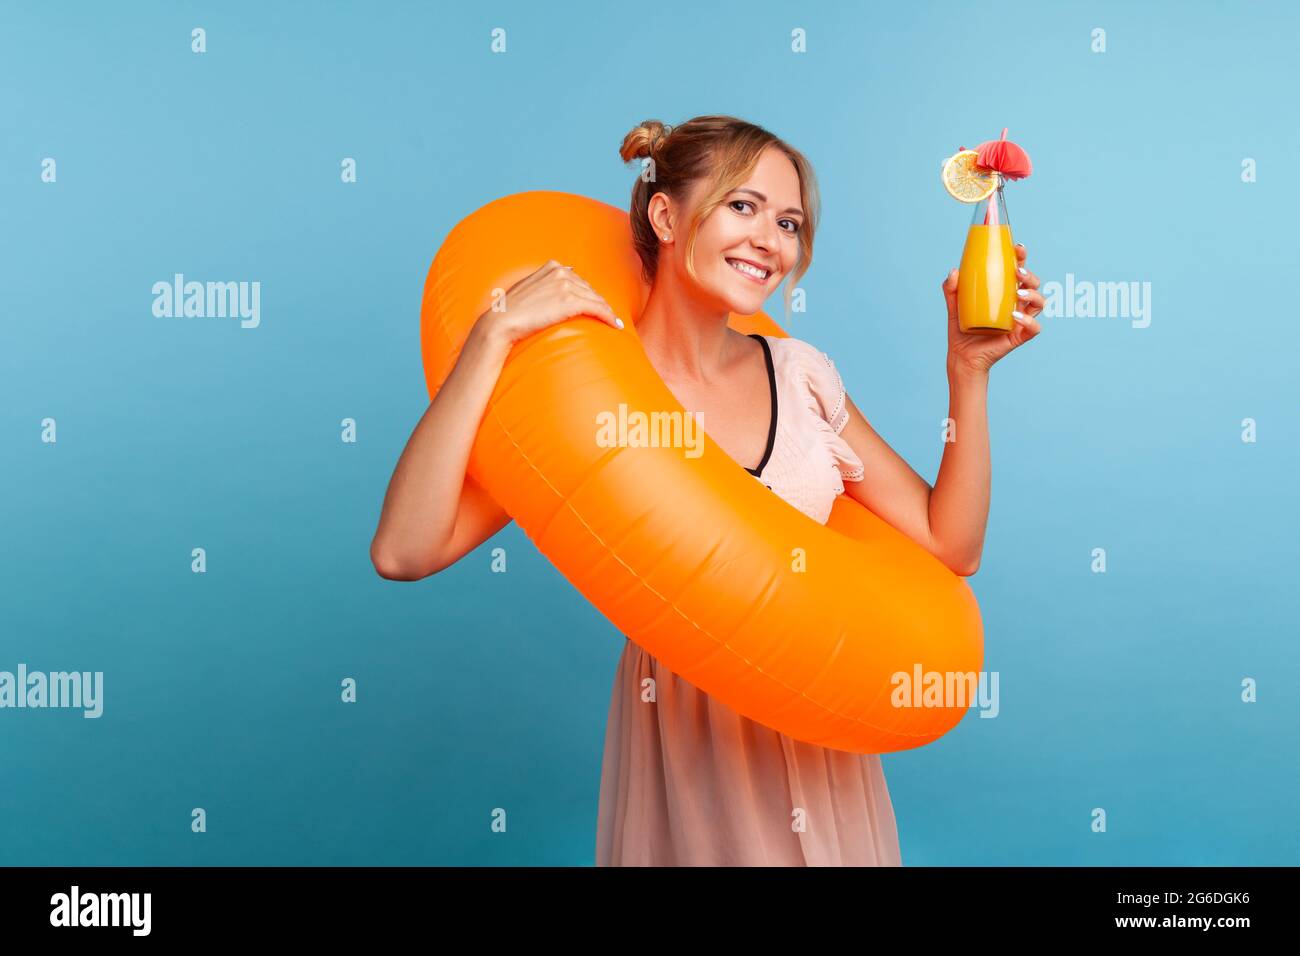 Happy blonde woman with orange rubber ring rising hand with cocktail and looking directly at camera with charming smile, wearing summer dress. Indoor Stock Photo